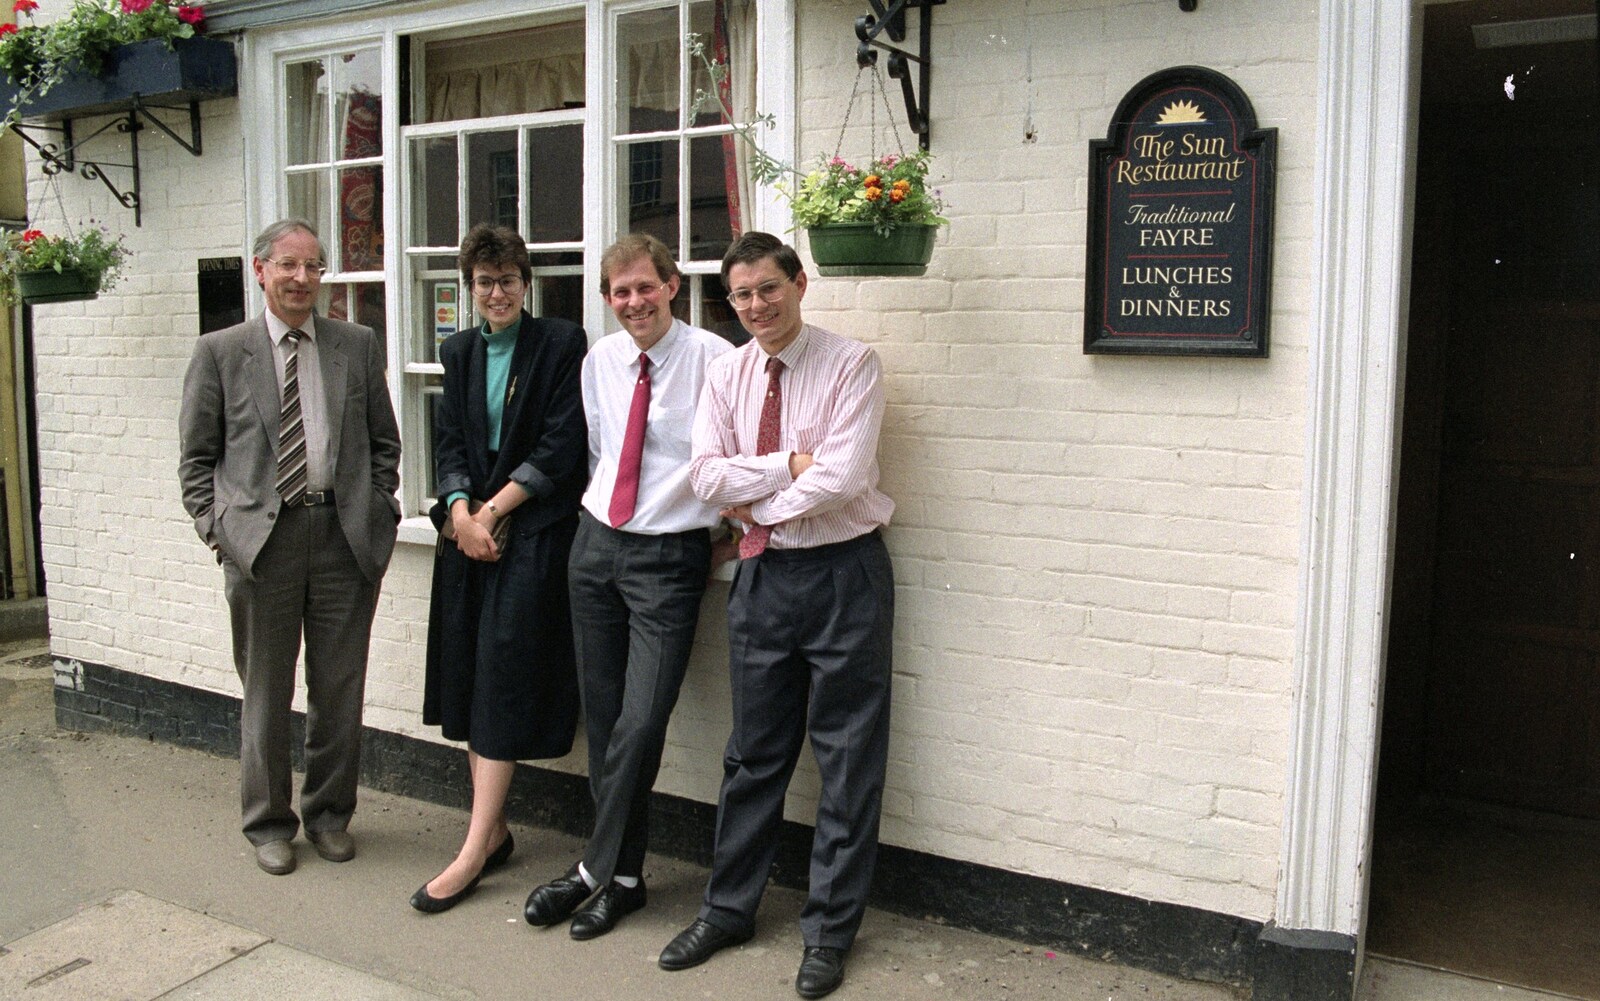 A Trip to Stratford-Upon-Avon and Other Randomness, Warwickshire, Suffolk and Norfolk - 28th June 1991: Lawrence 'Laz' Best, Six-foot Sue, Tim and another at The Sun, Colchester